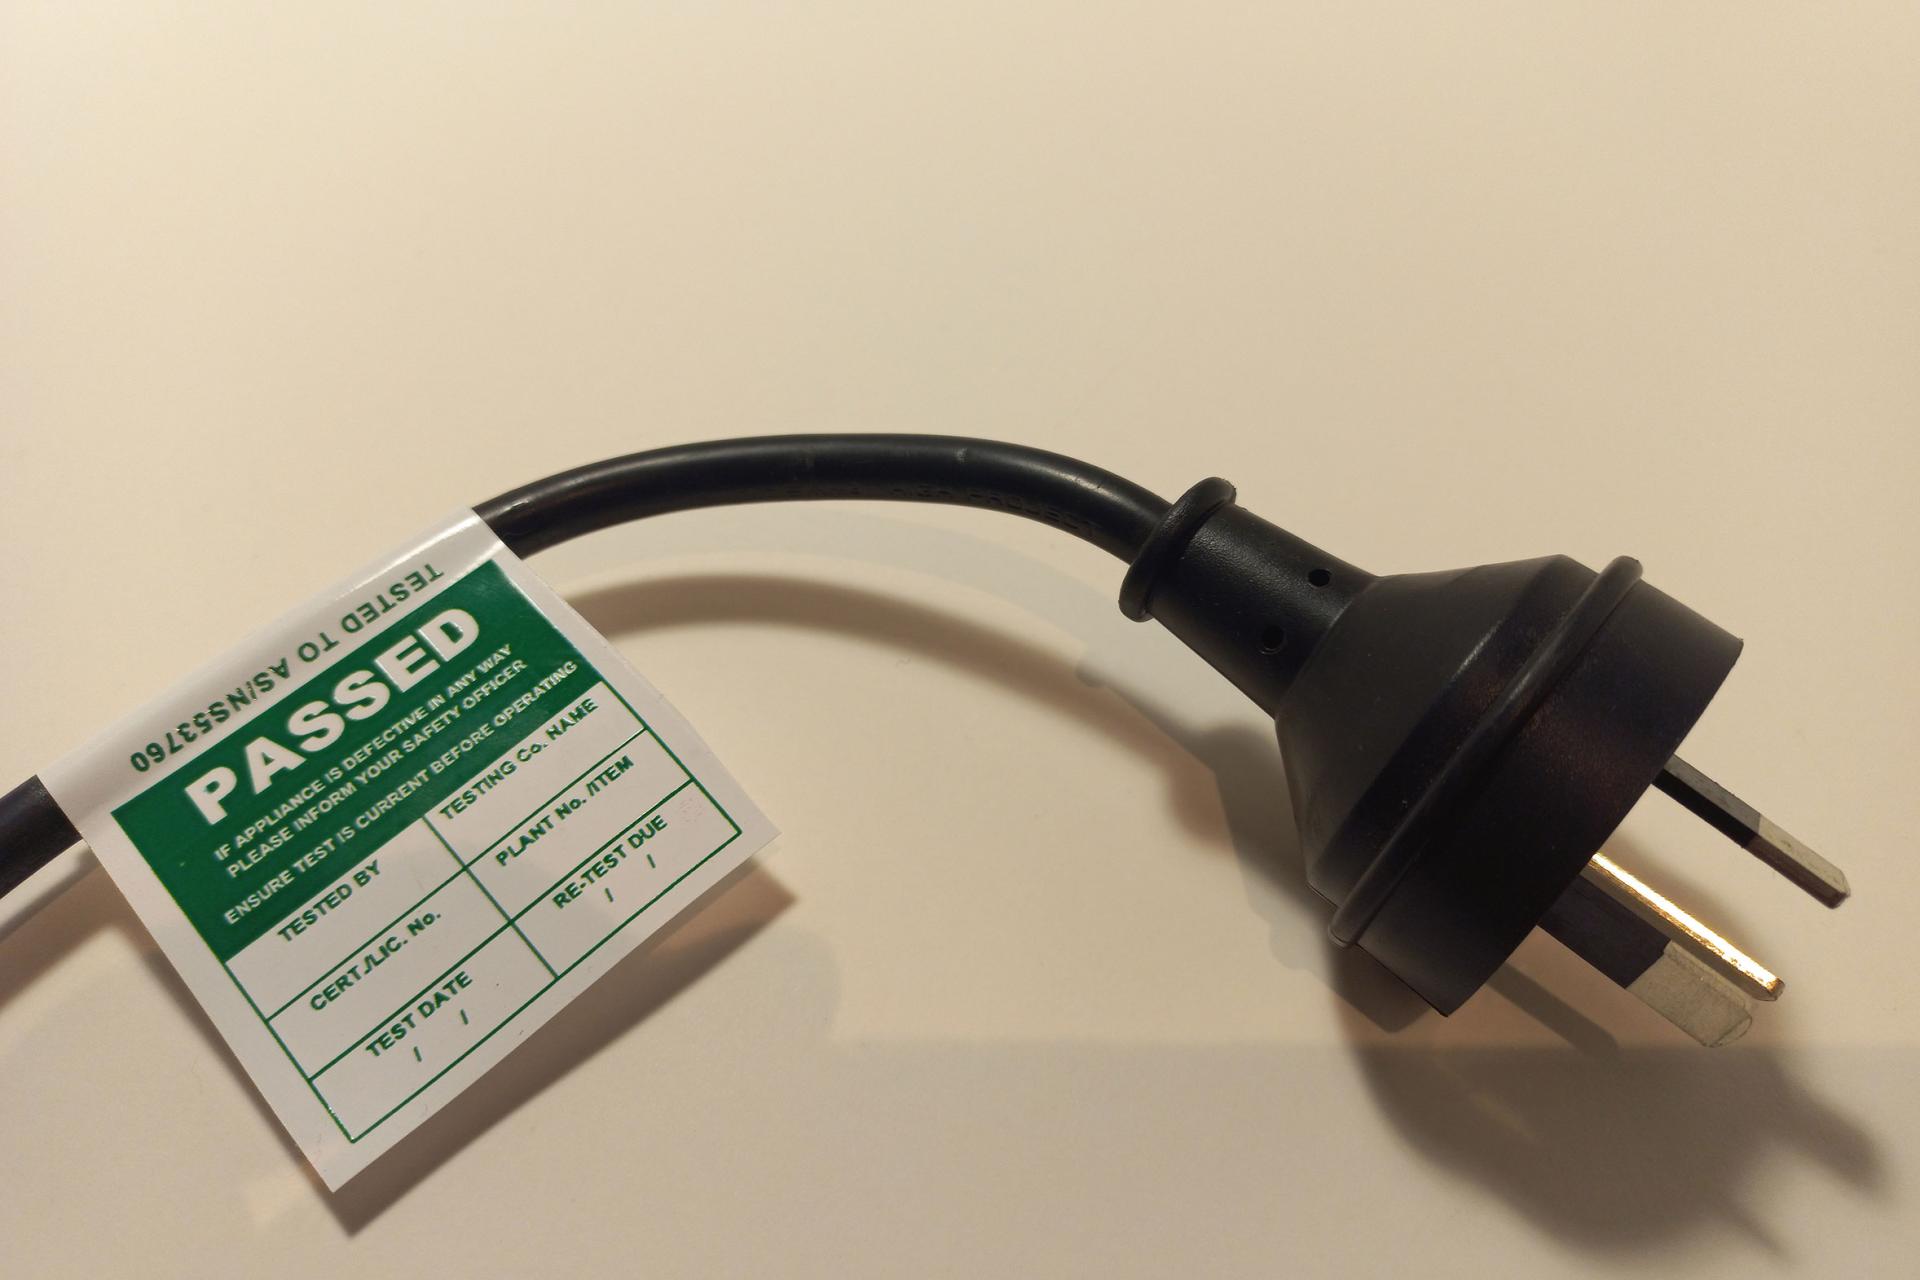 NZ Plug cable with a label tag attached